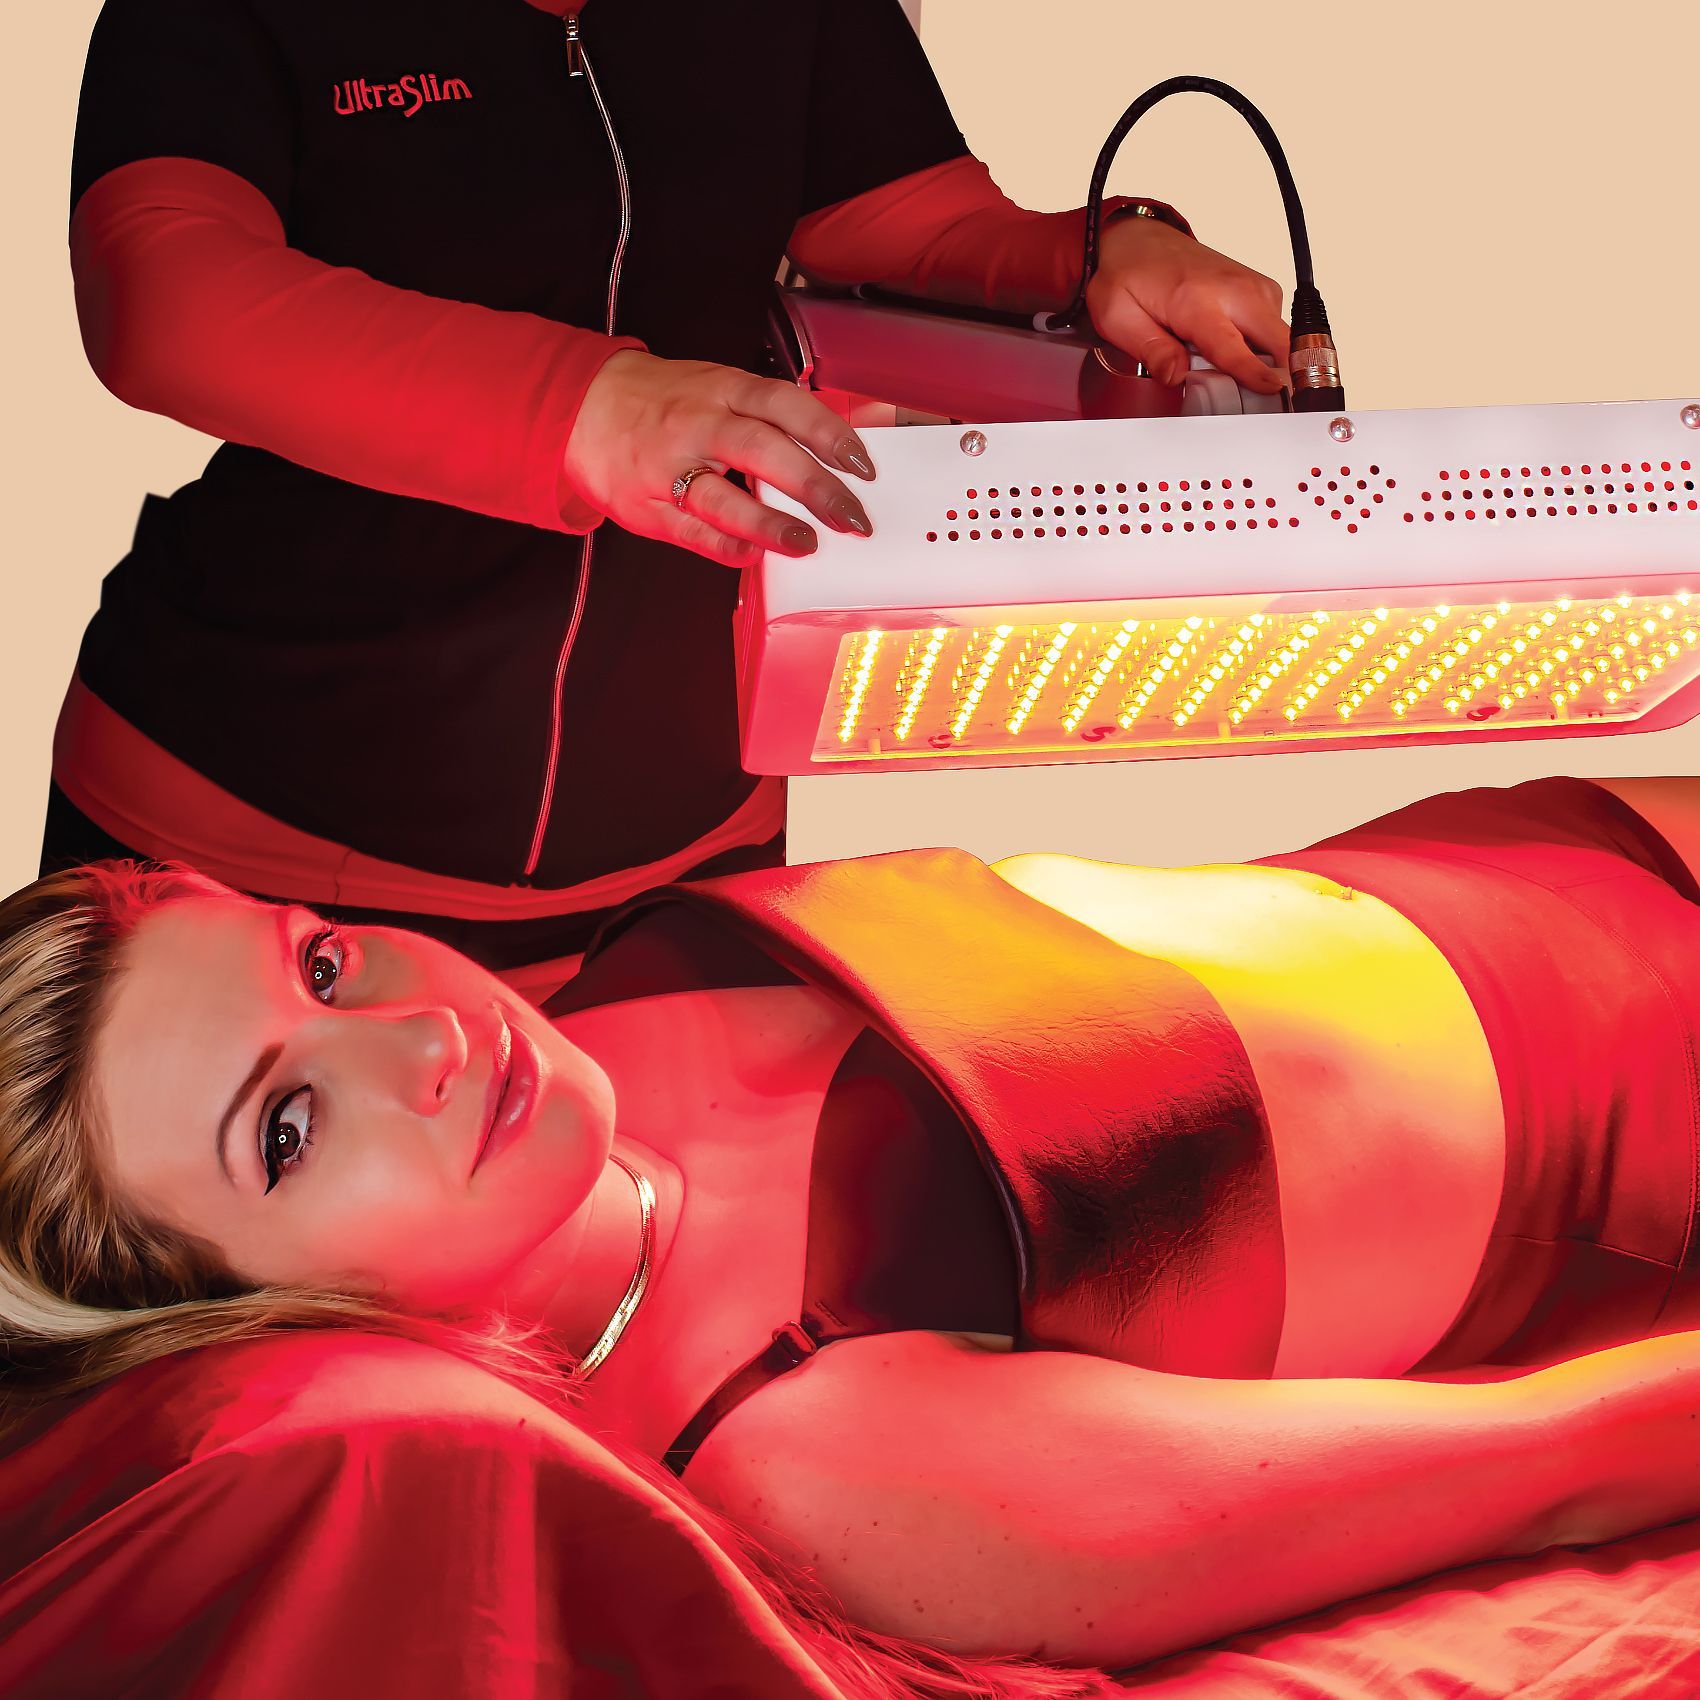 A woman getting an ultraslim treatment on her stomach